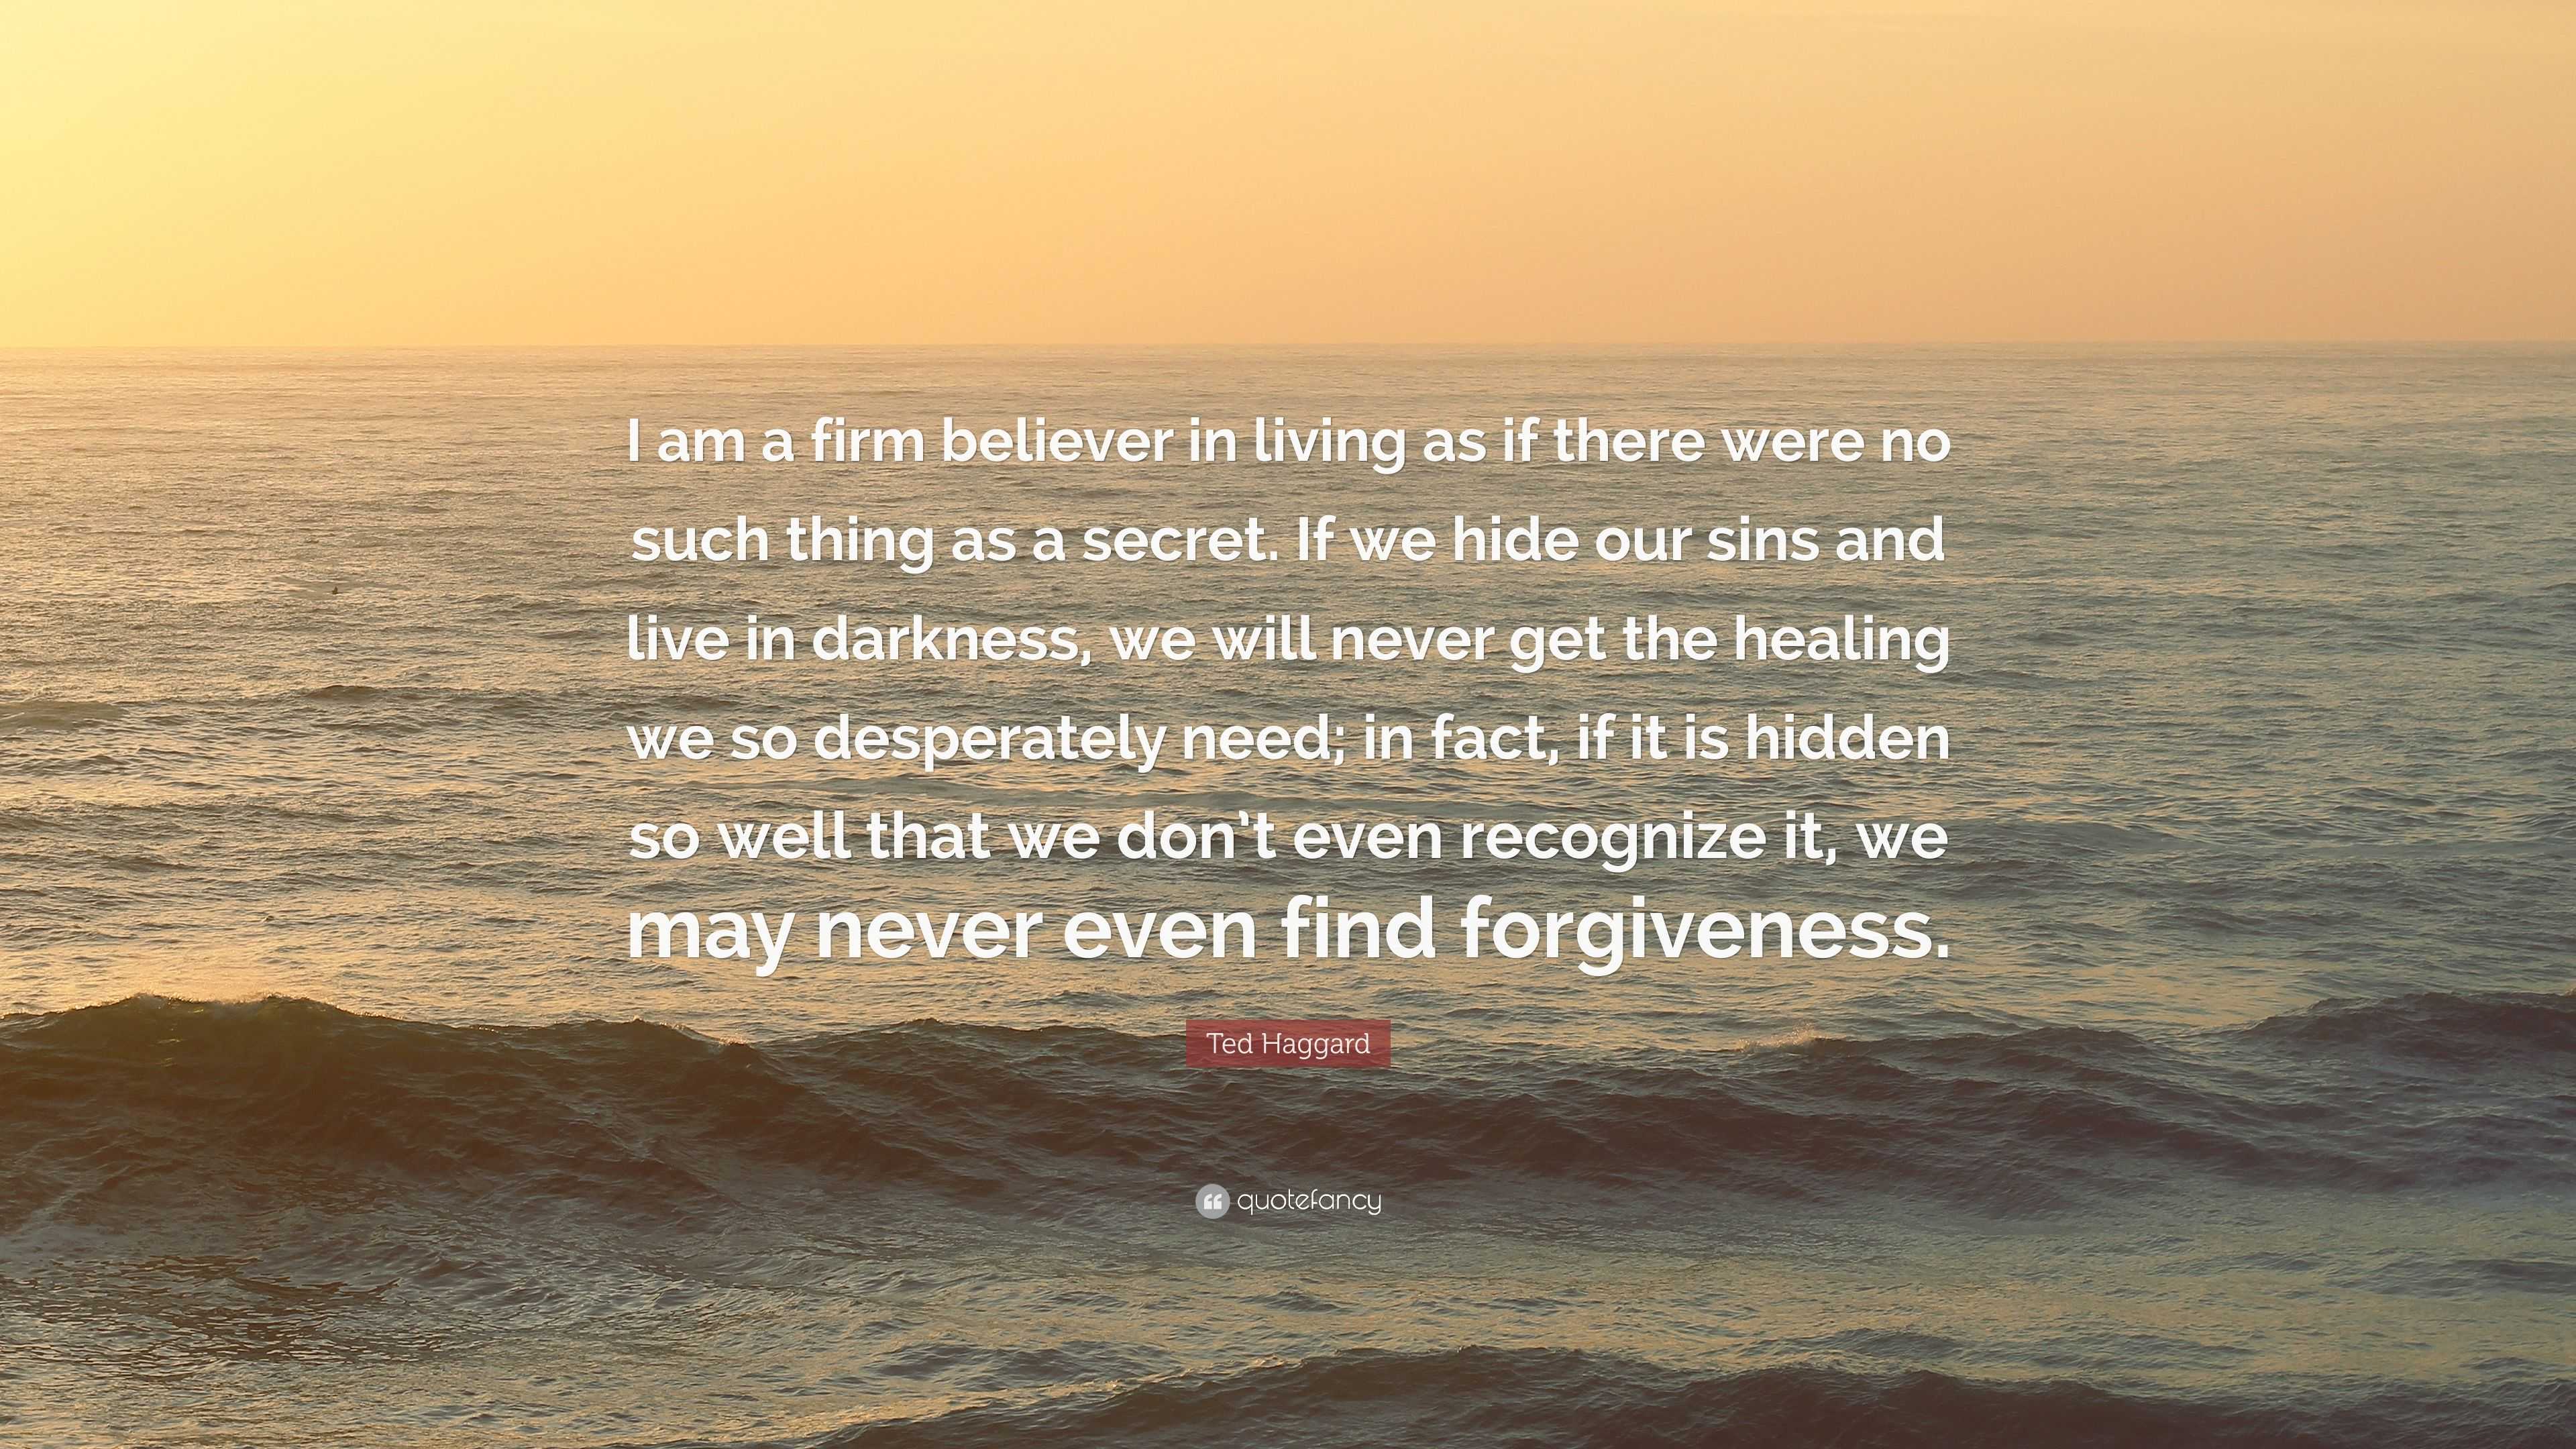 Ted Haggard Quote: “I am a firm believer in living as if there were no such  thing as a secret. If we hide our sins and live in darkness, we ”